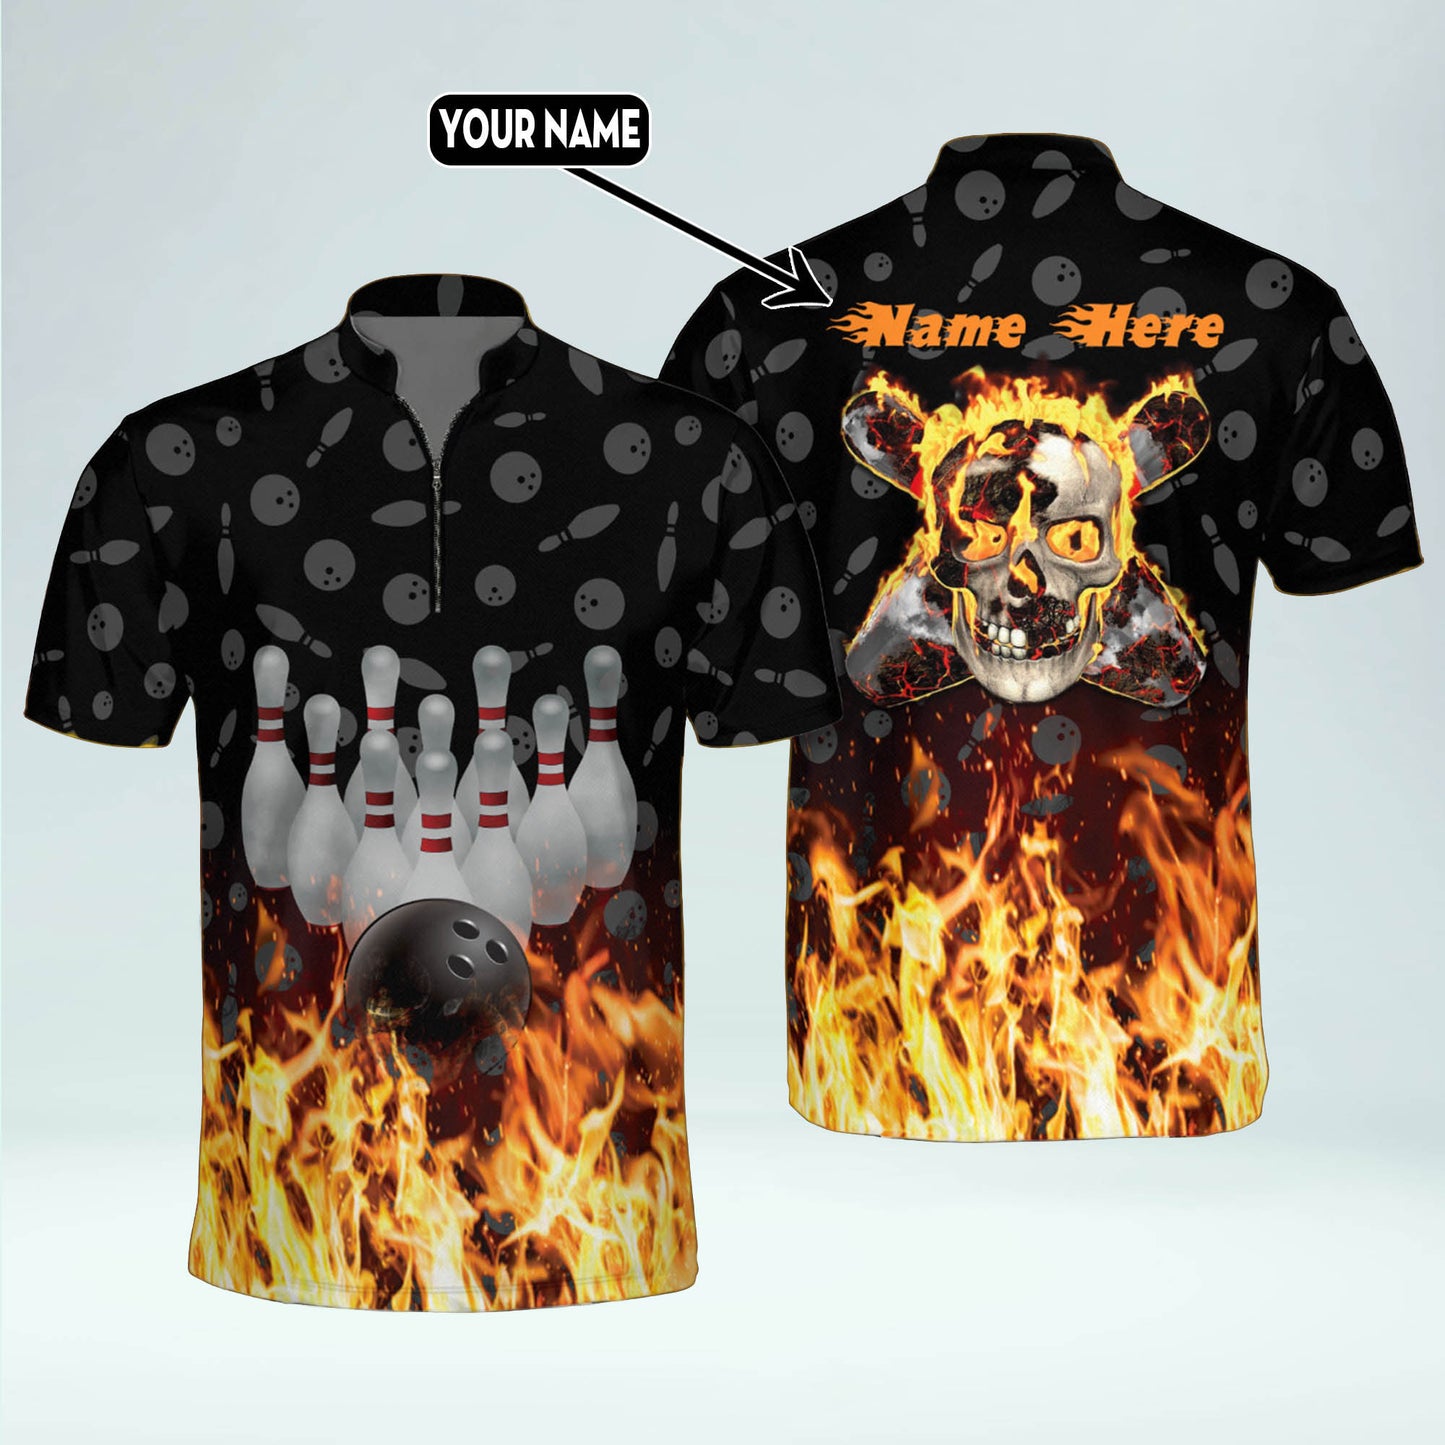 Funny Bowling Shirts for Men And Women BM0268